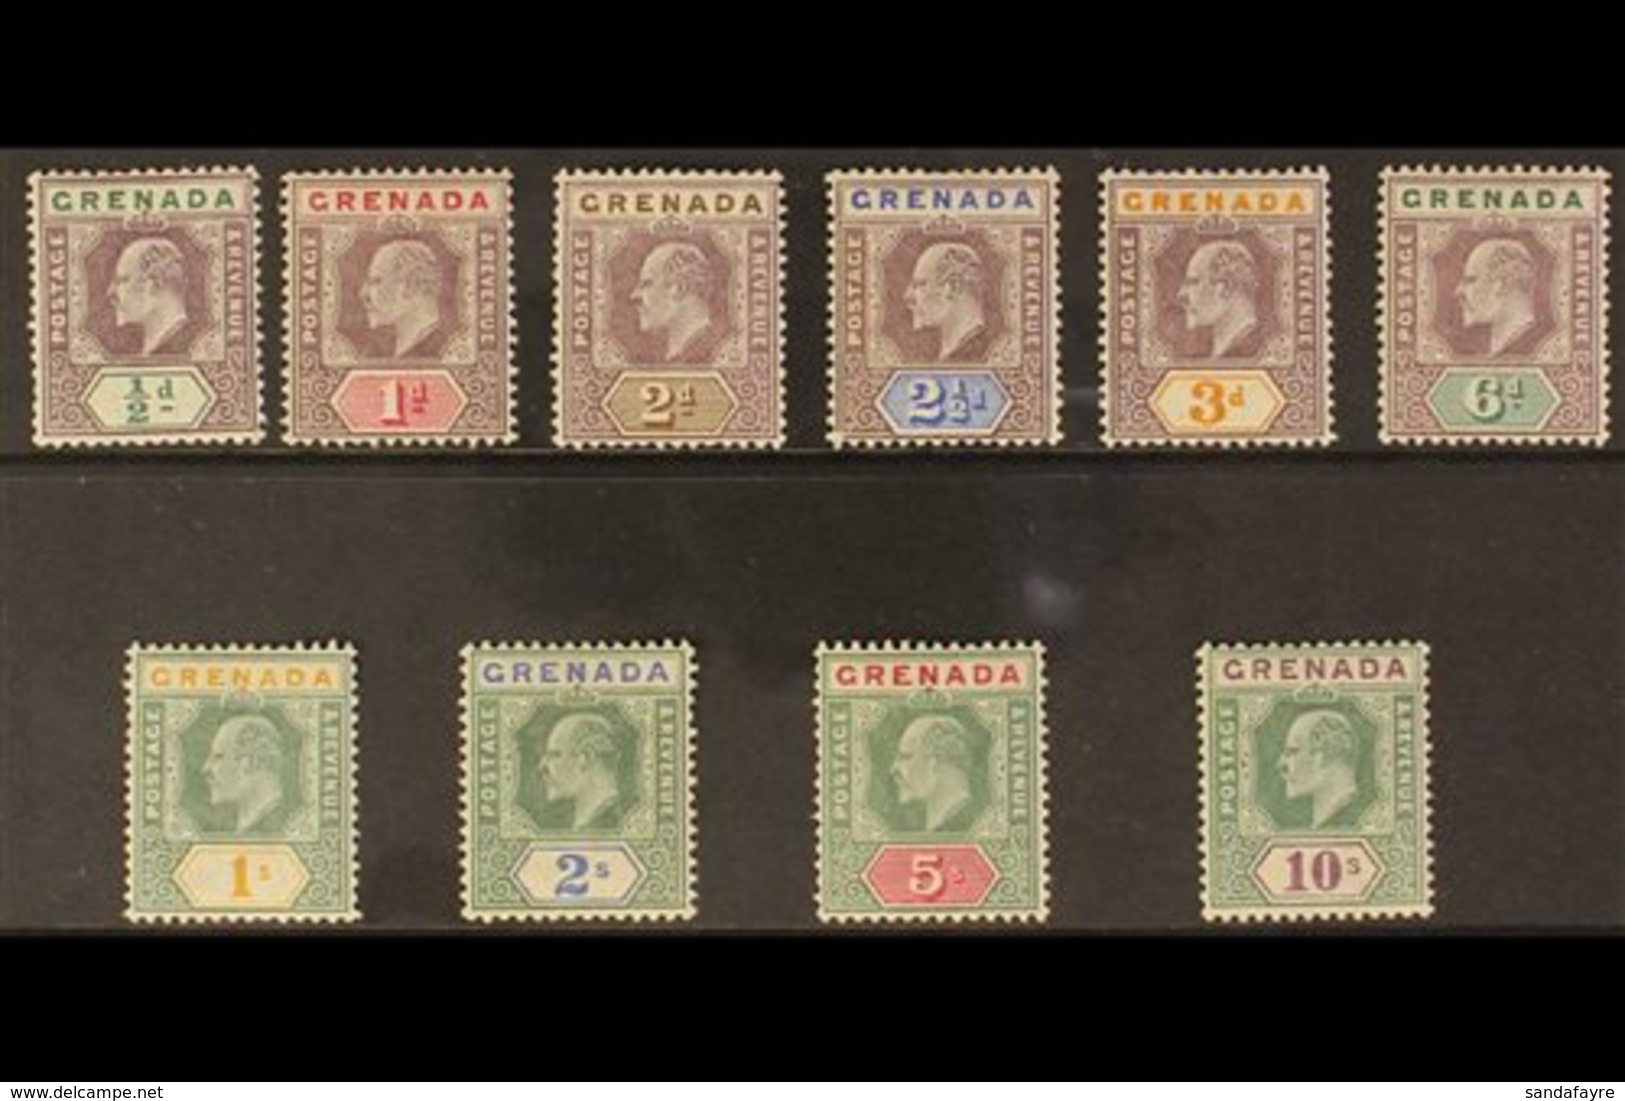 1902 King Edward VII Complete Definitive Set, Watermark Crown CA, SG 57/66, Very Fine Mint With Some Of The Stamps Never - Grenada (...-1974)